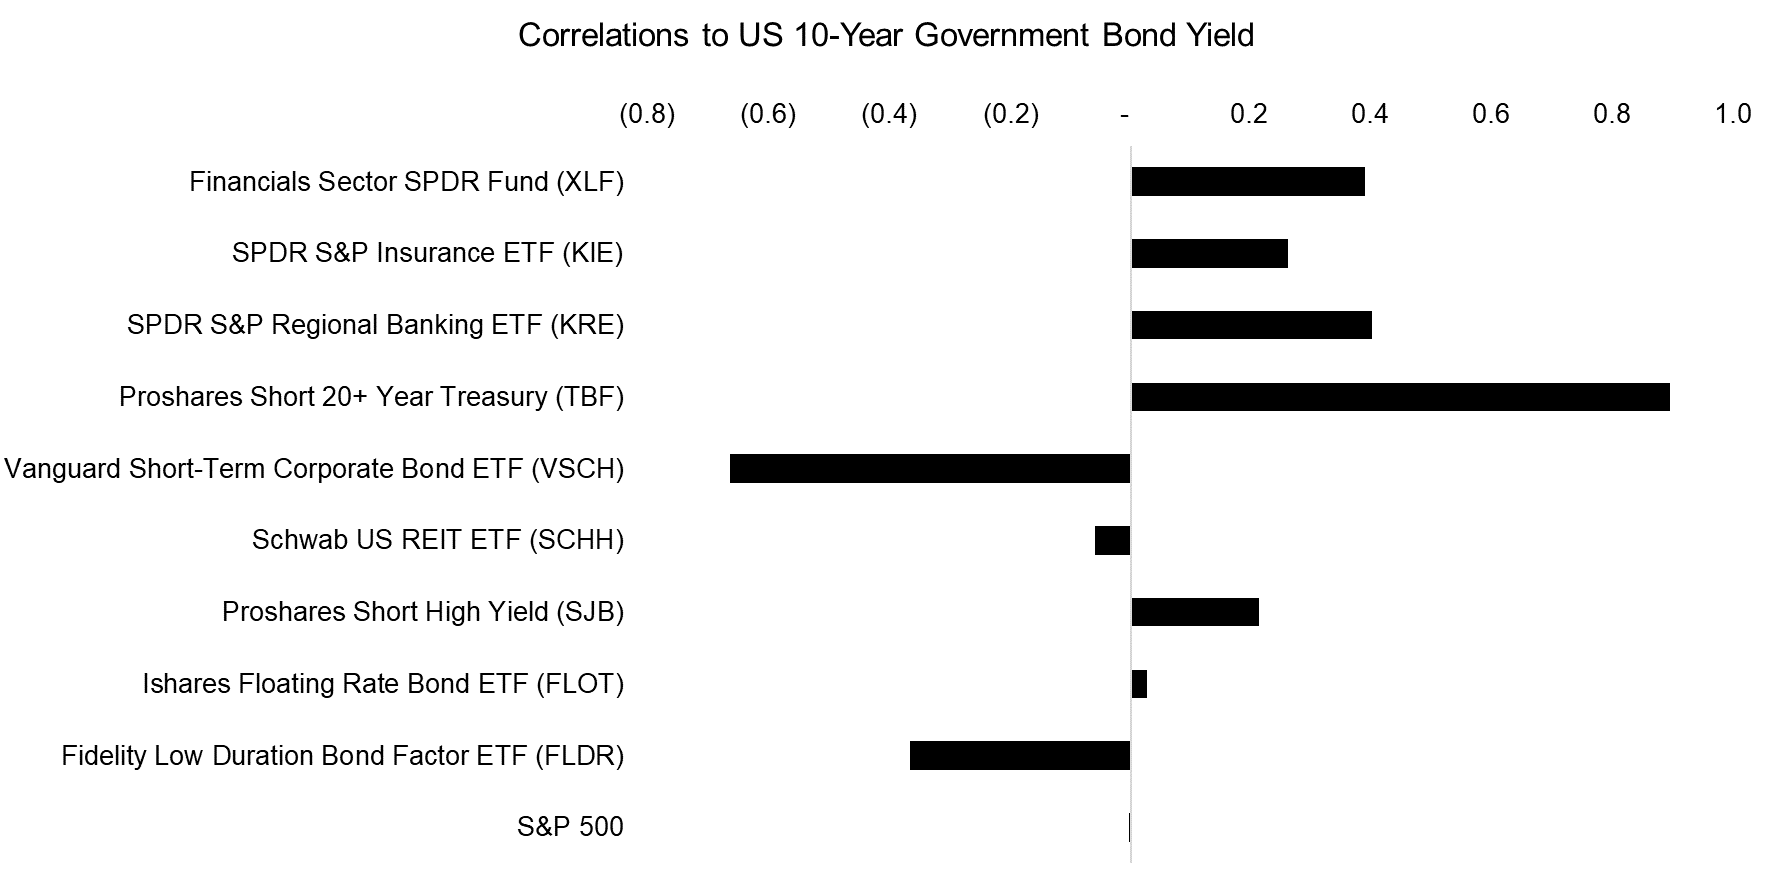 Correlations to US 10-Year Government Bond Yield